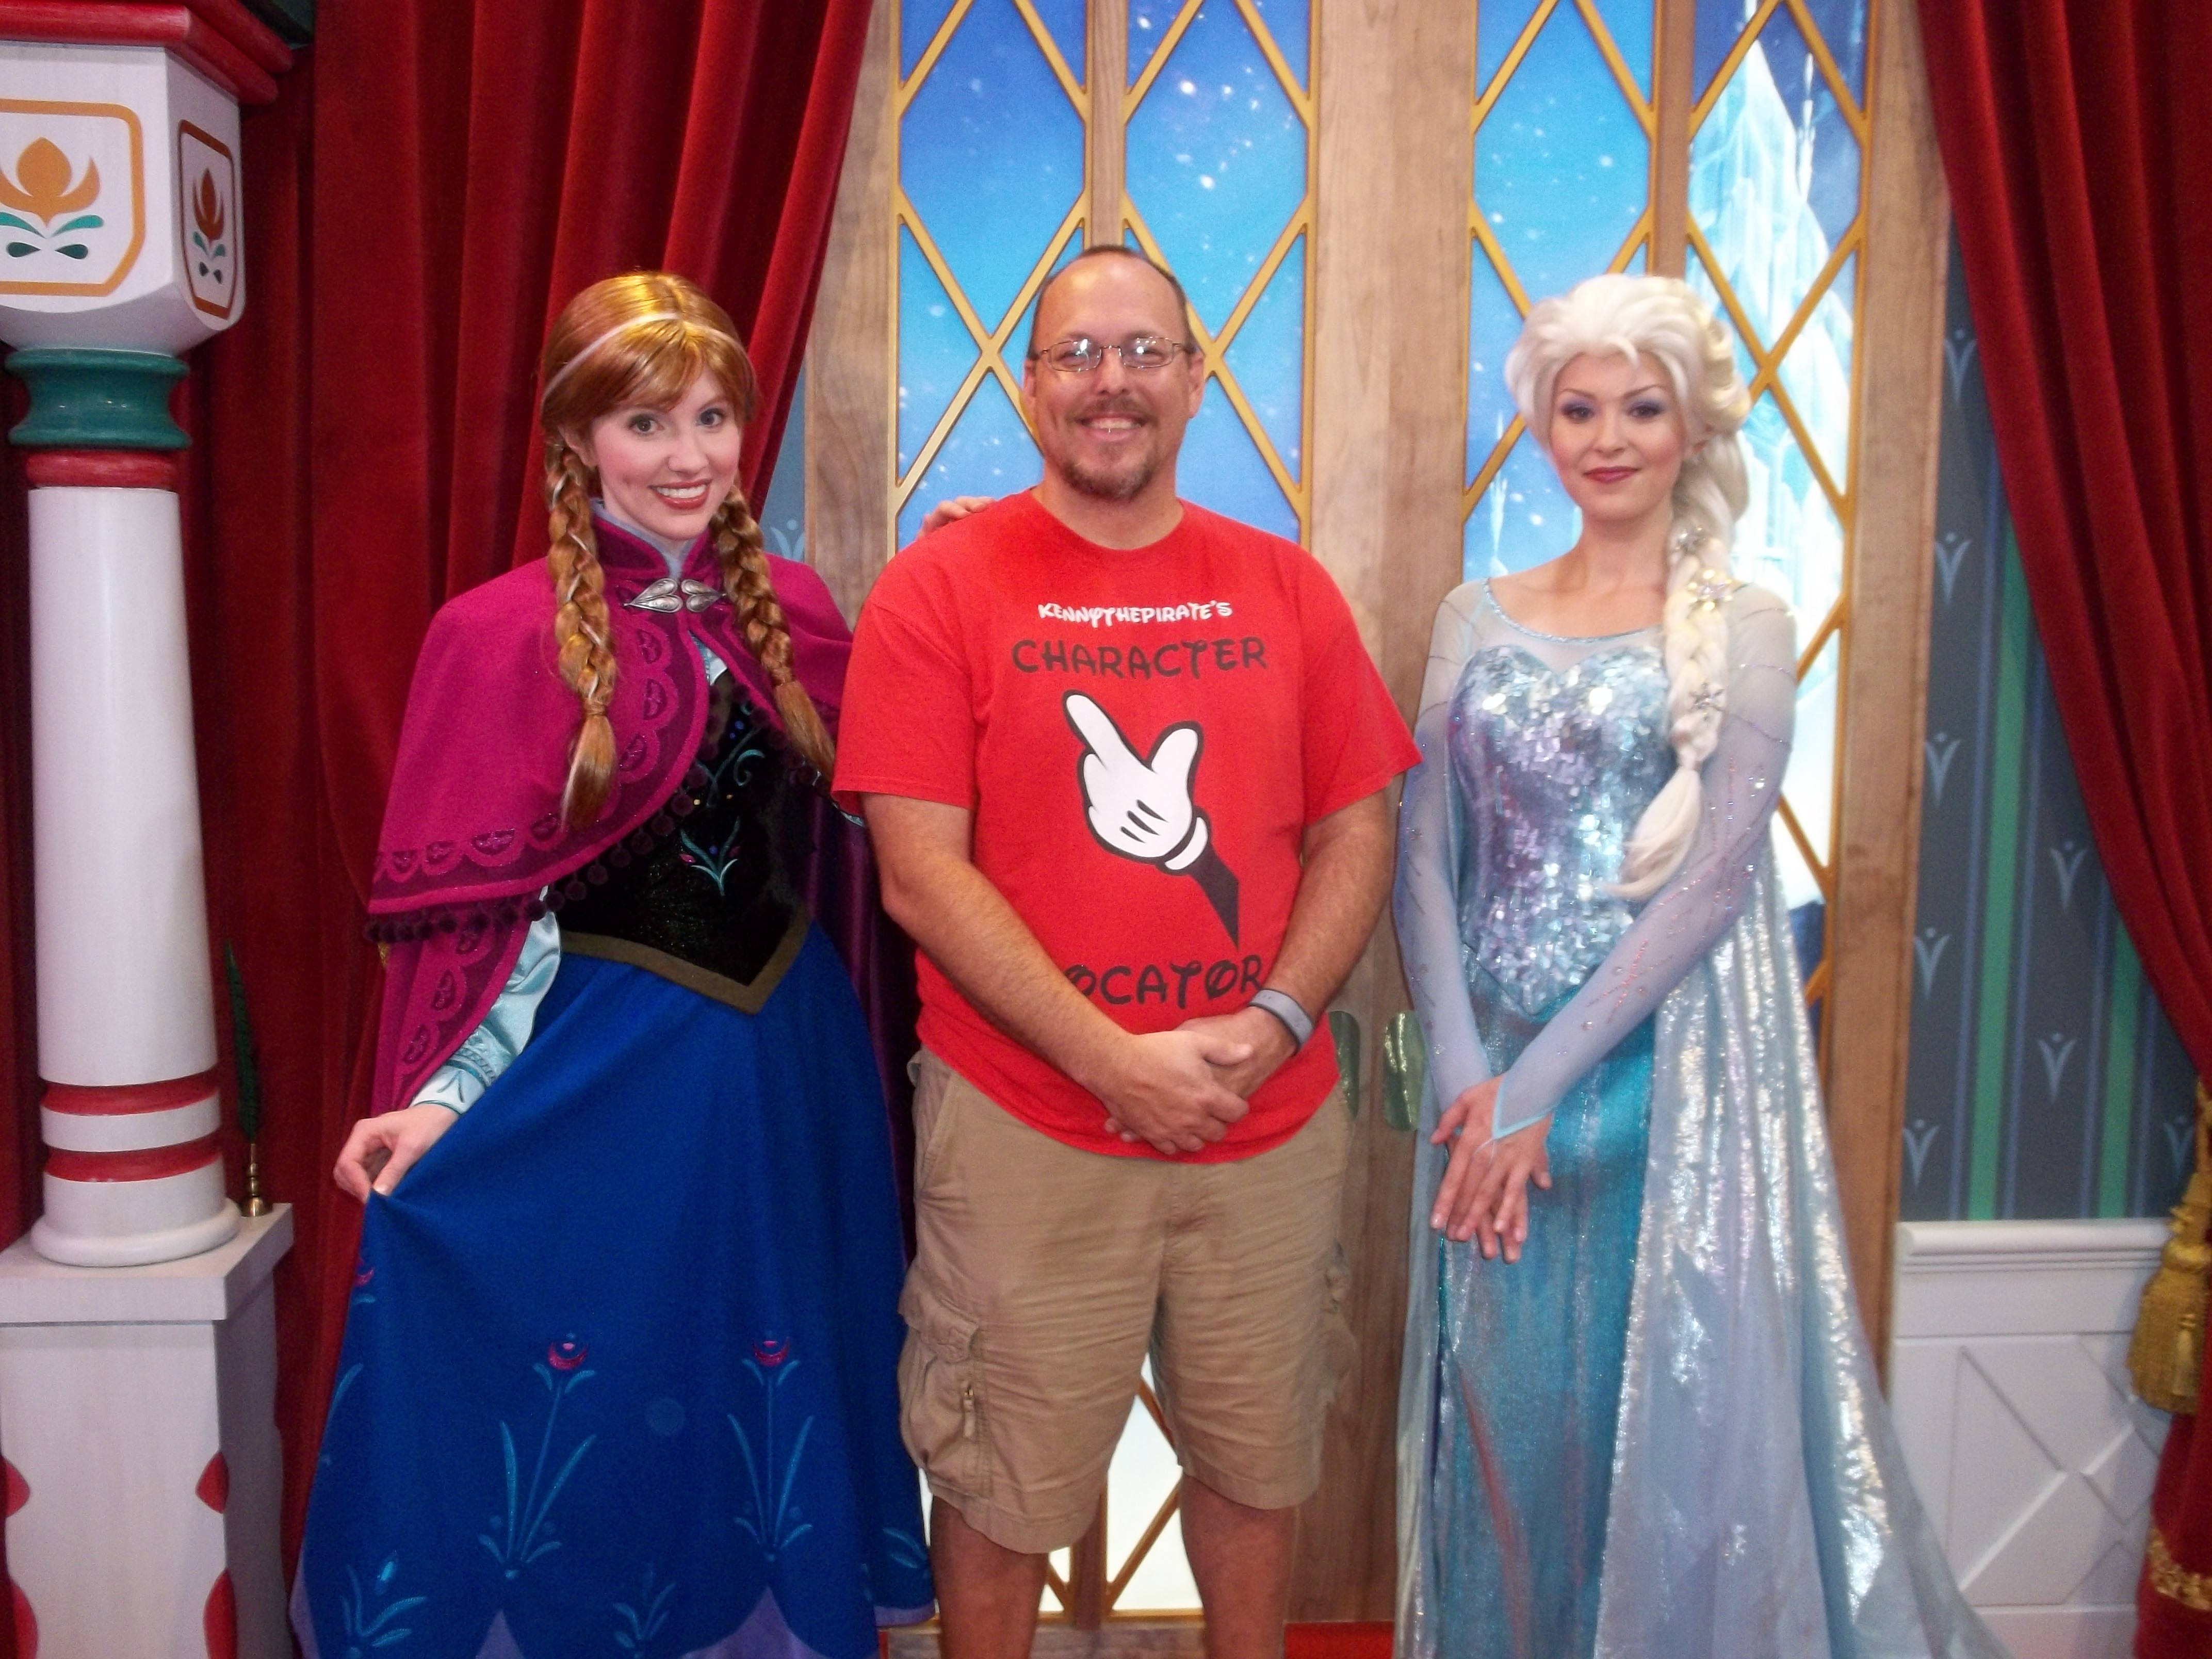 Anna and Elsa, Frozen, Norway, Epcot, Meet and Greet